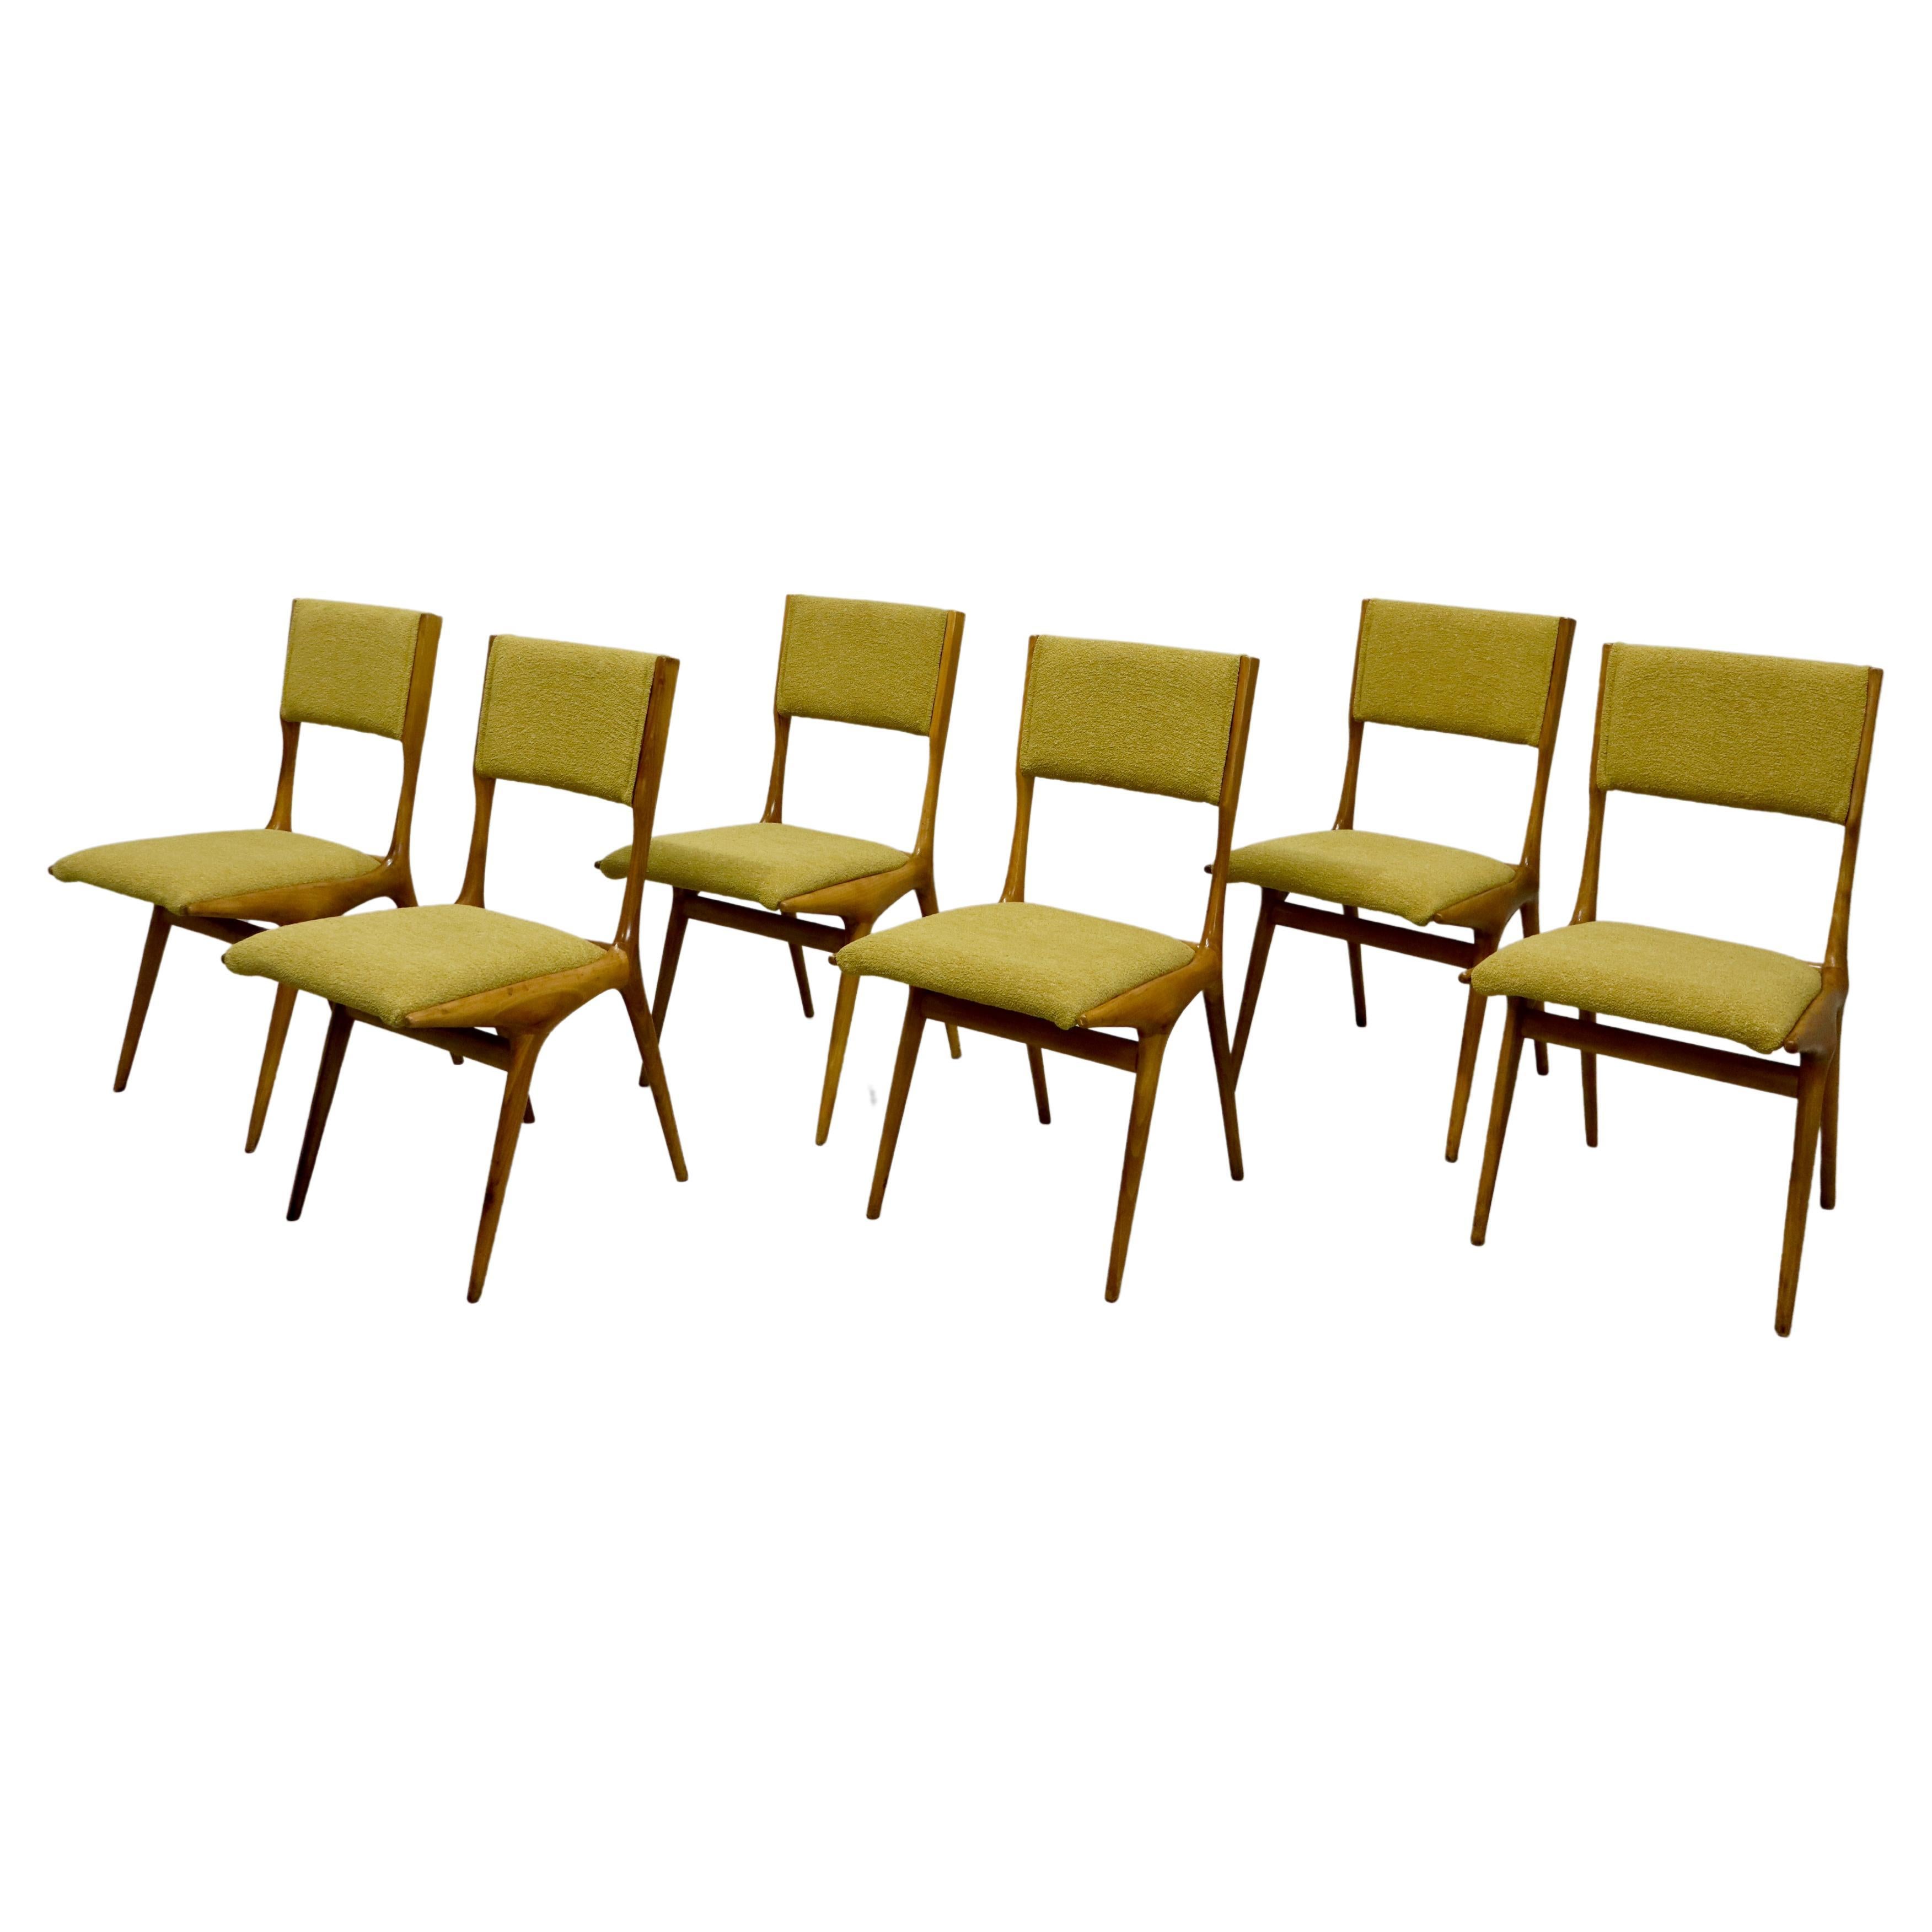 Six chairs  "634" model designed by Carlo de Carli and produced by Casssina 1954 For Sale